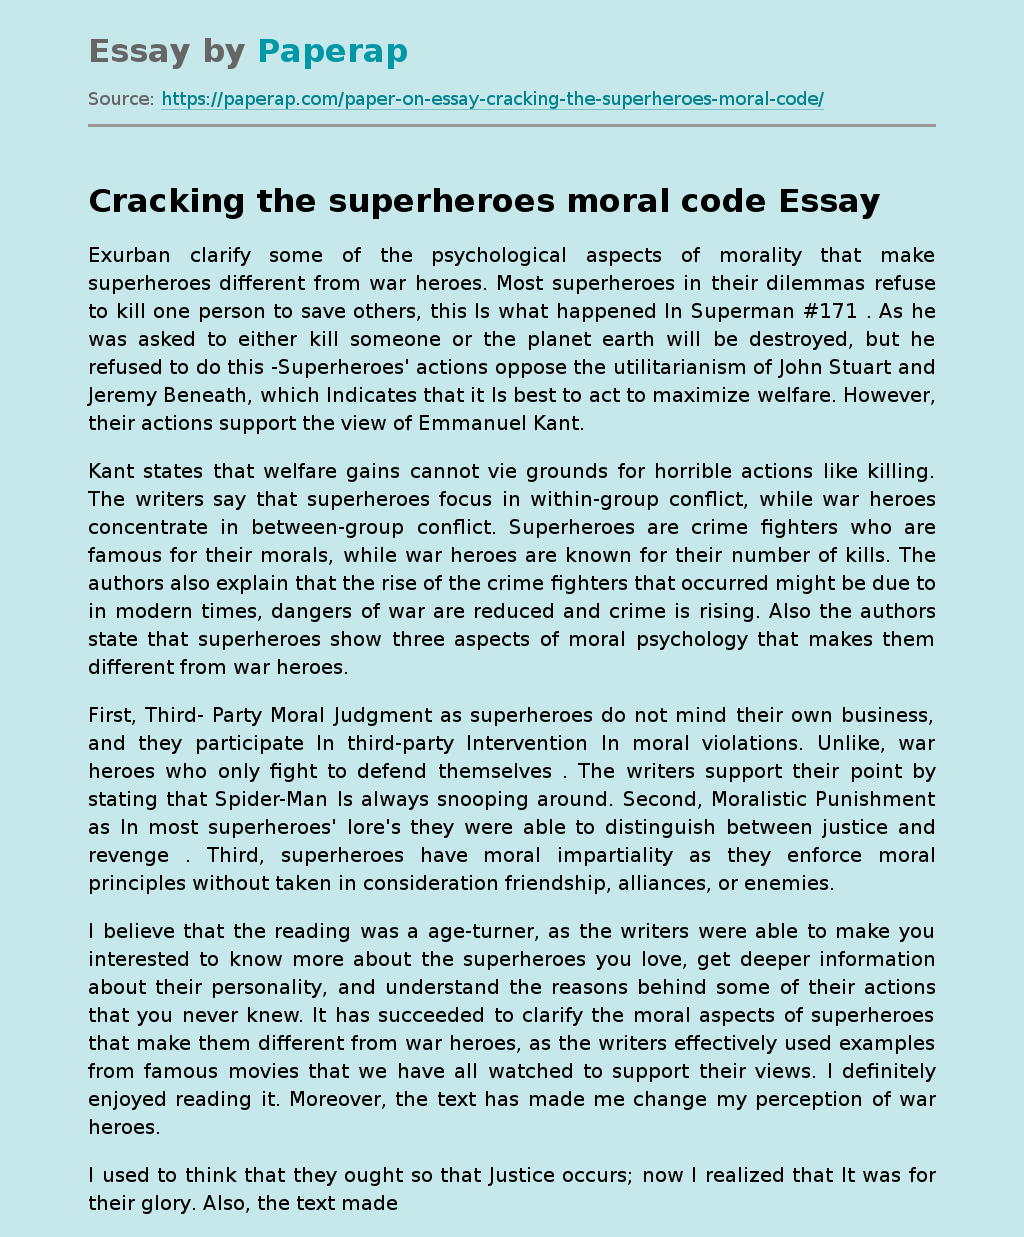 Cracking the Superheroes Moral Code